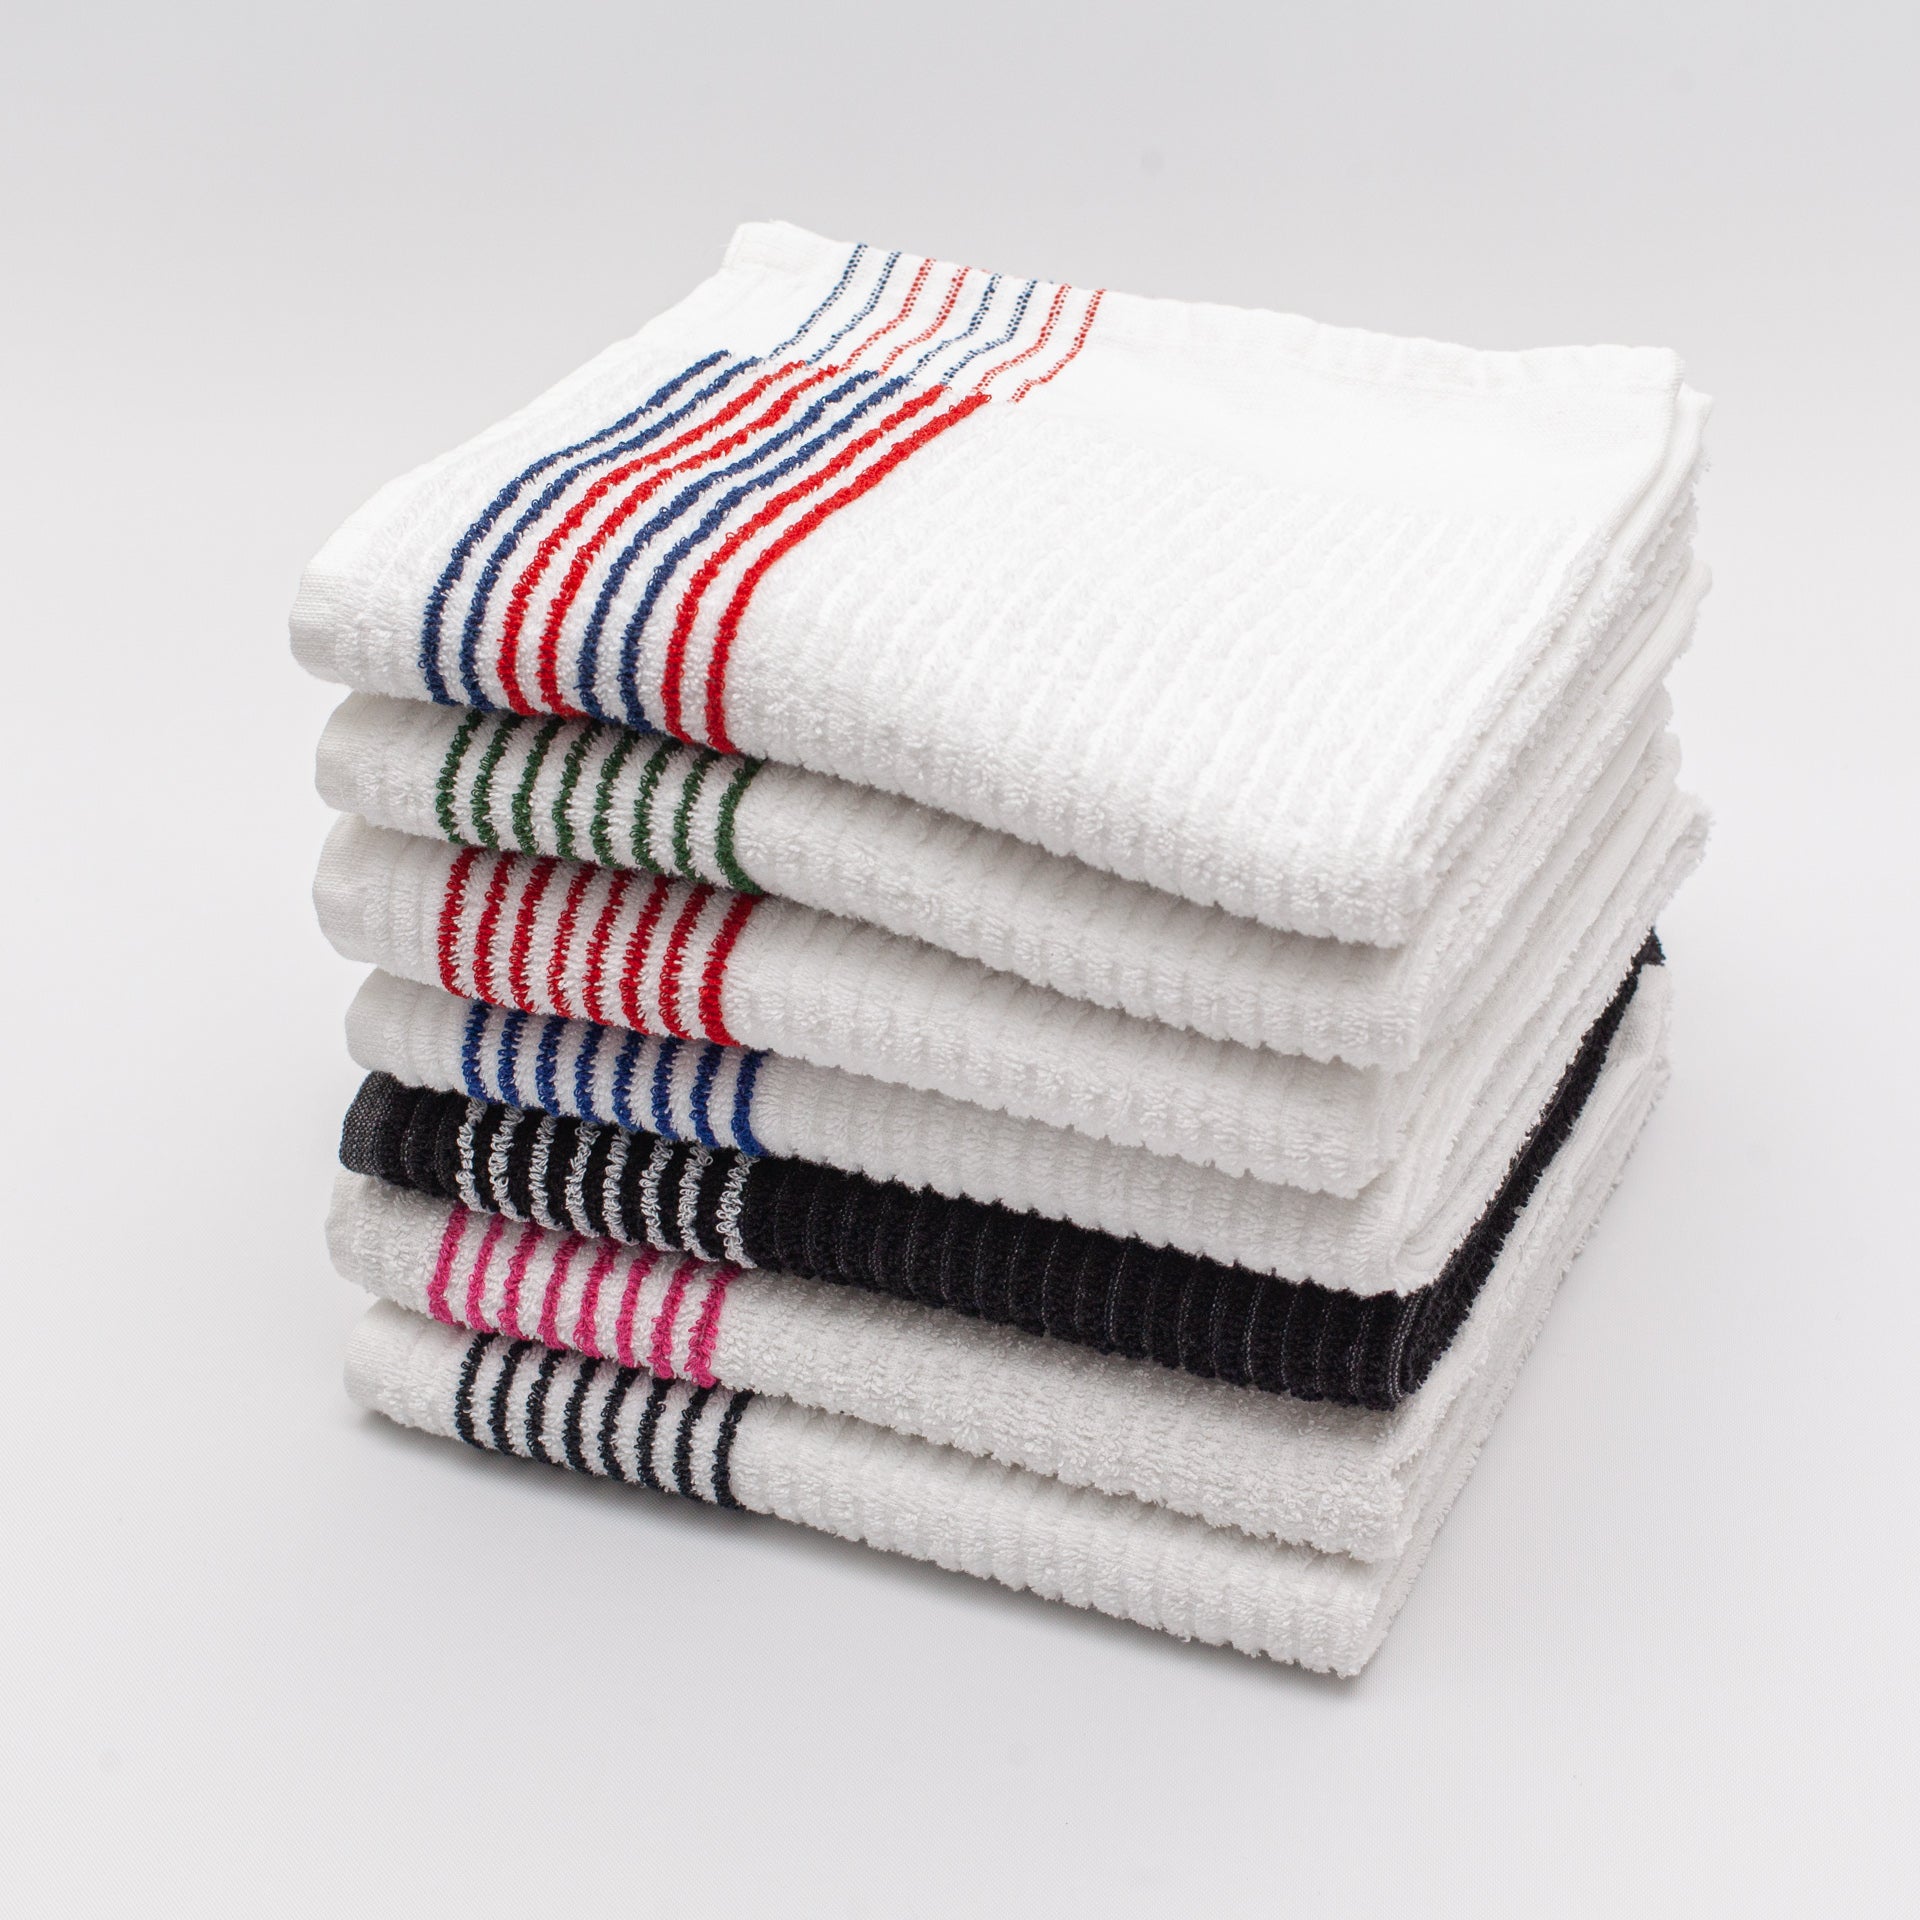 golf caddy towels with stripes. Red and navy stripes, green stripes, red stripes, blue stripes, black with white stripes, pink stripes, black stripes from Cayce Golf